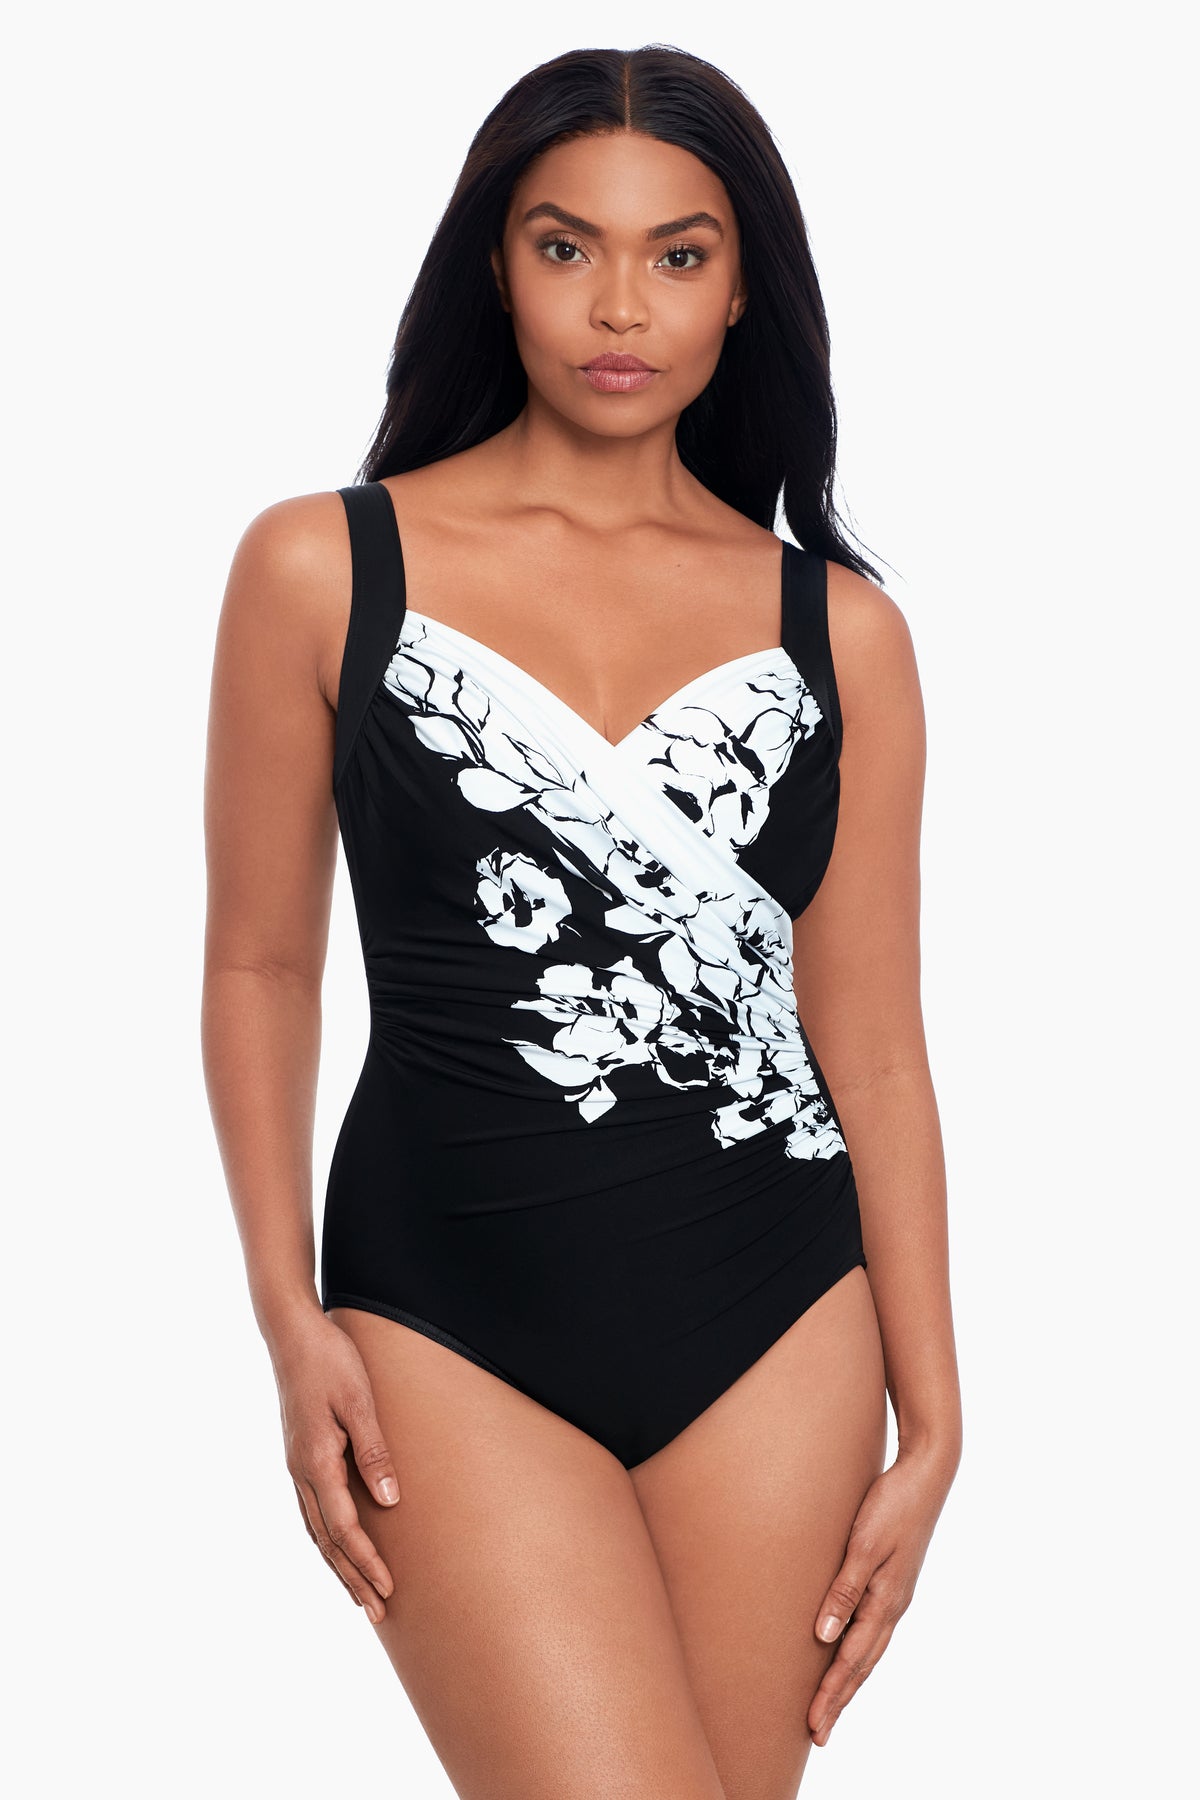 Miraclesuit Must Haves Oceanus Black One Piece DDD-Cup